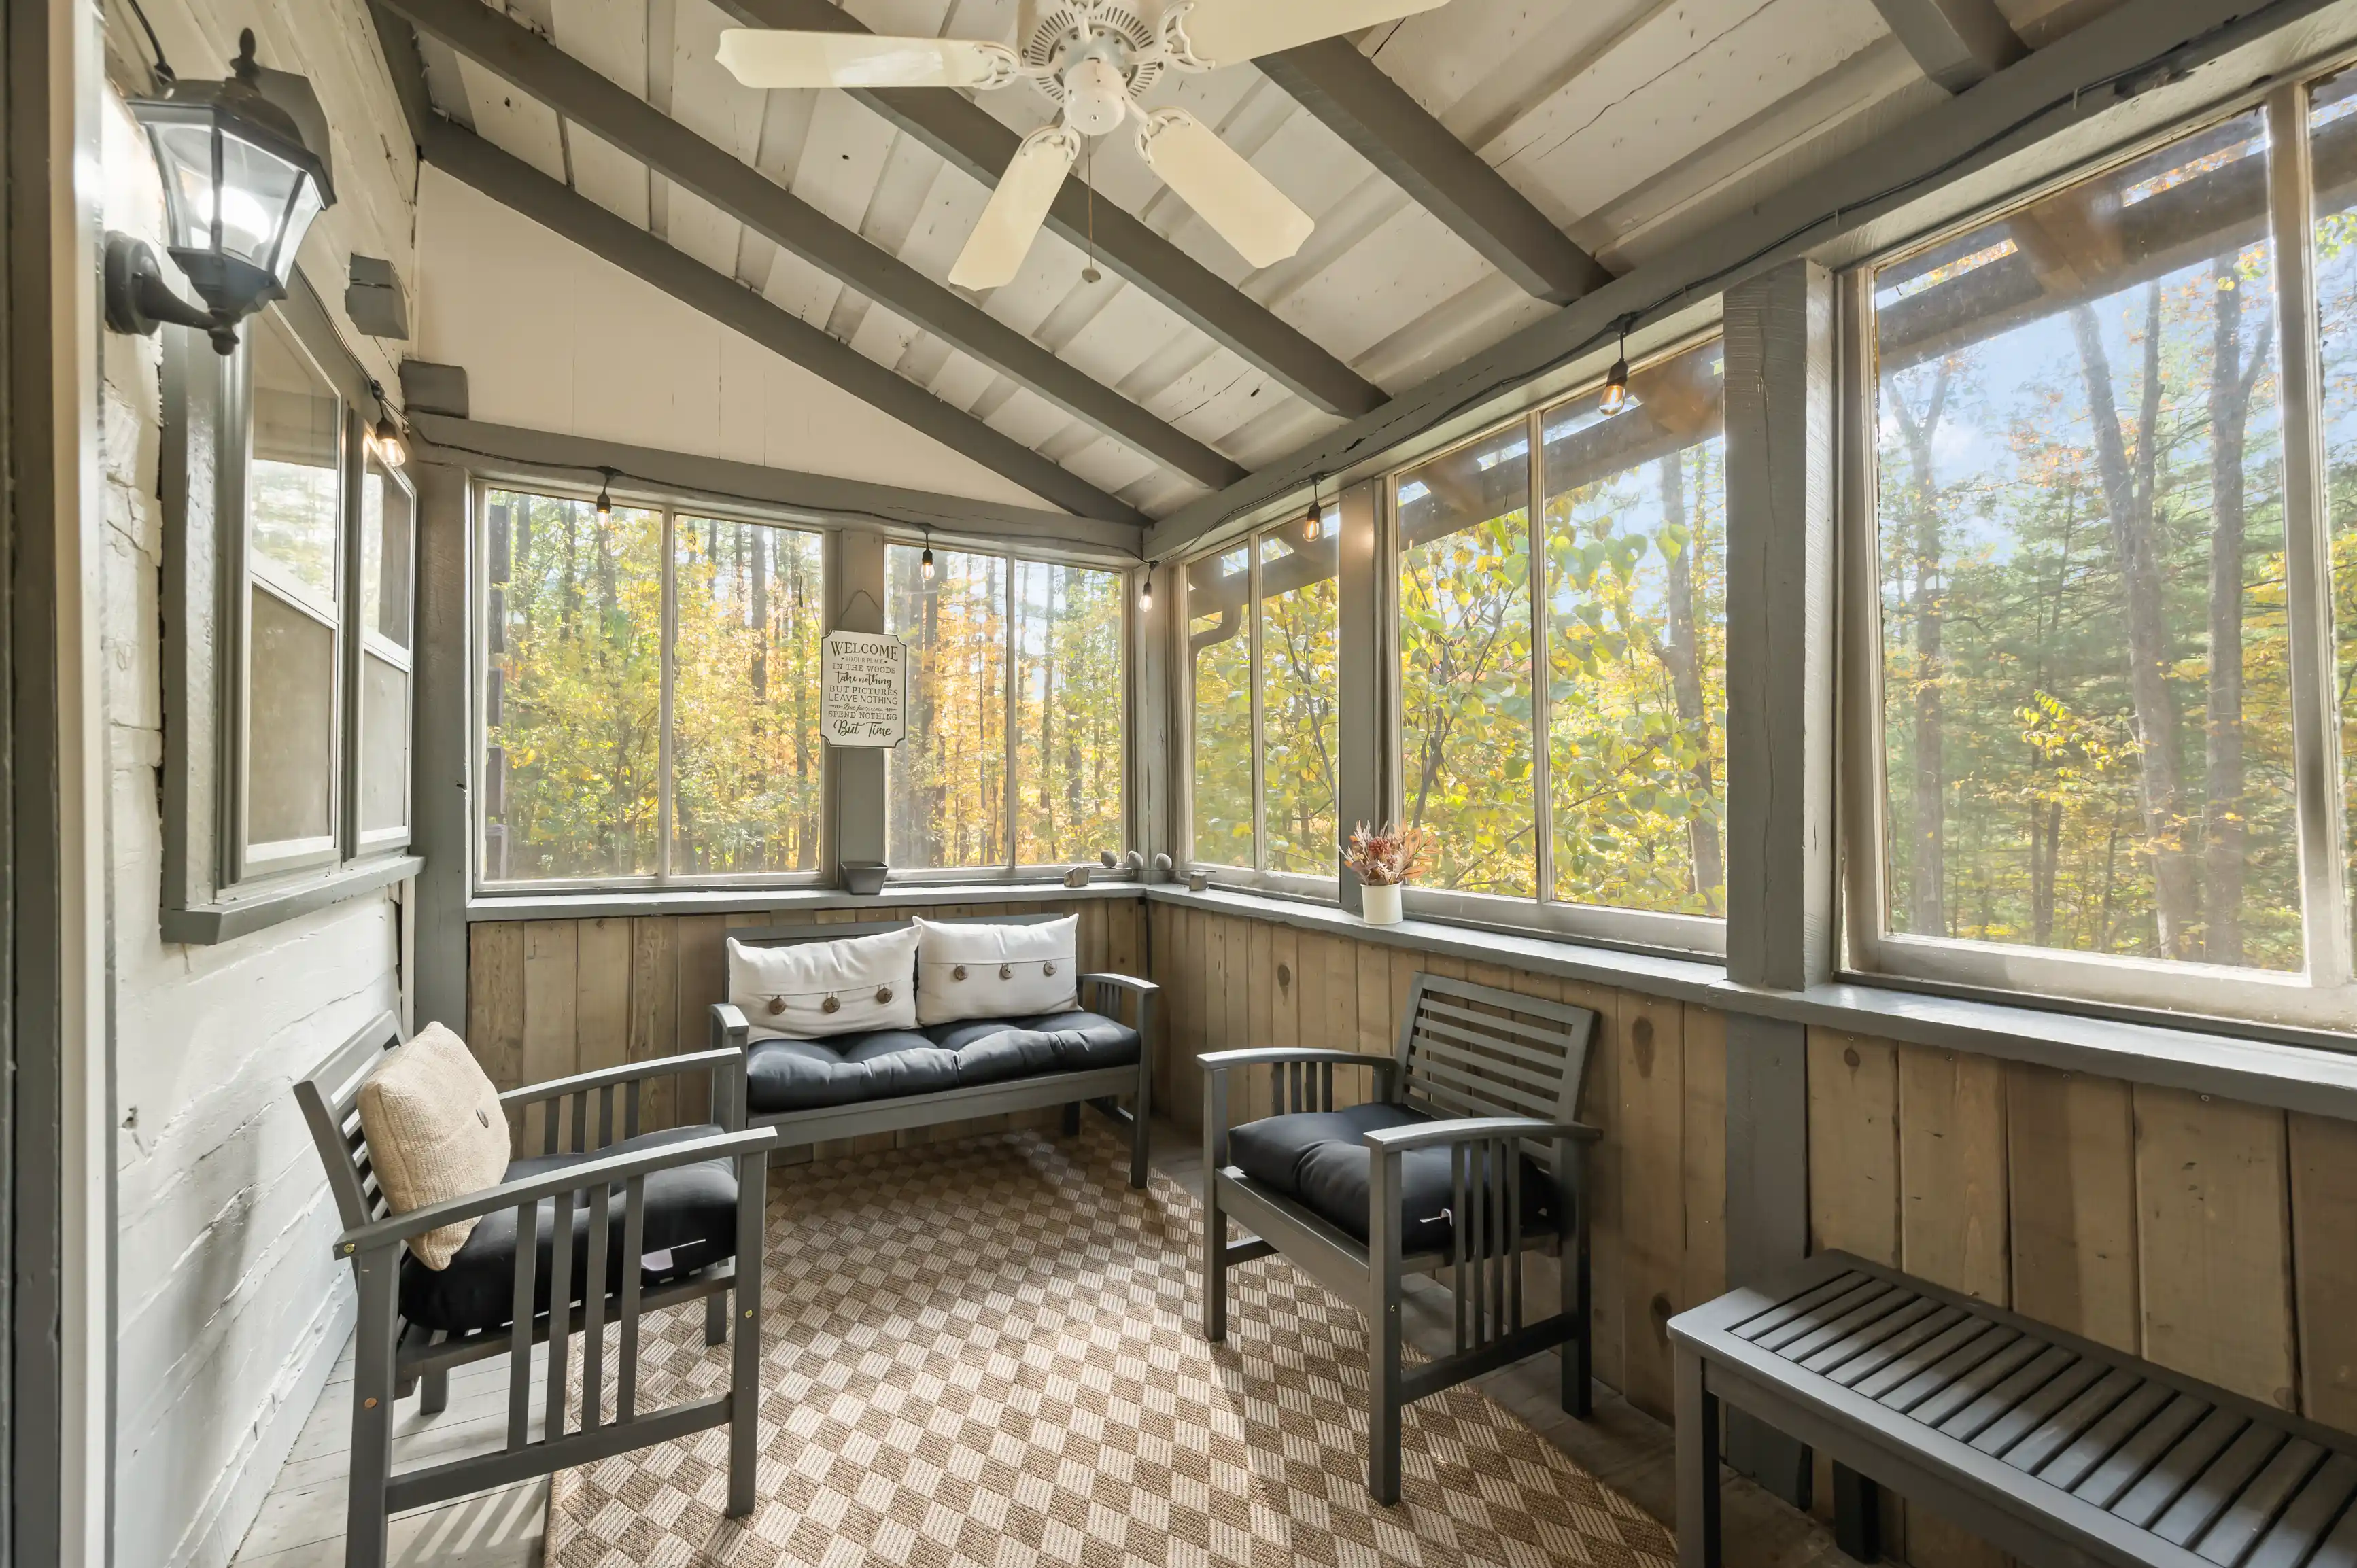 Cozy sunroom with a ceiling fan, large windows with fall foliage views, and seating furniture.